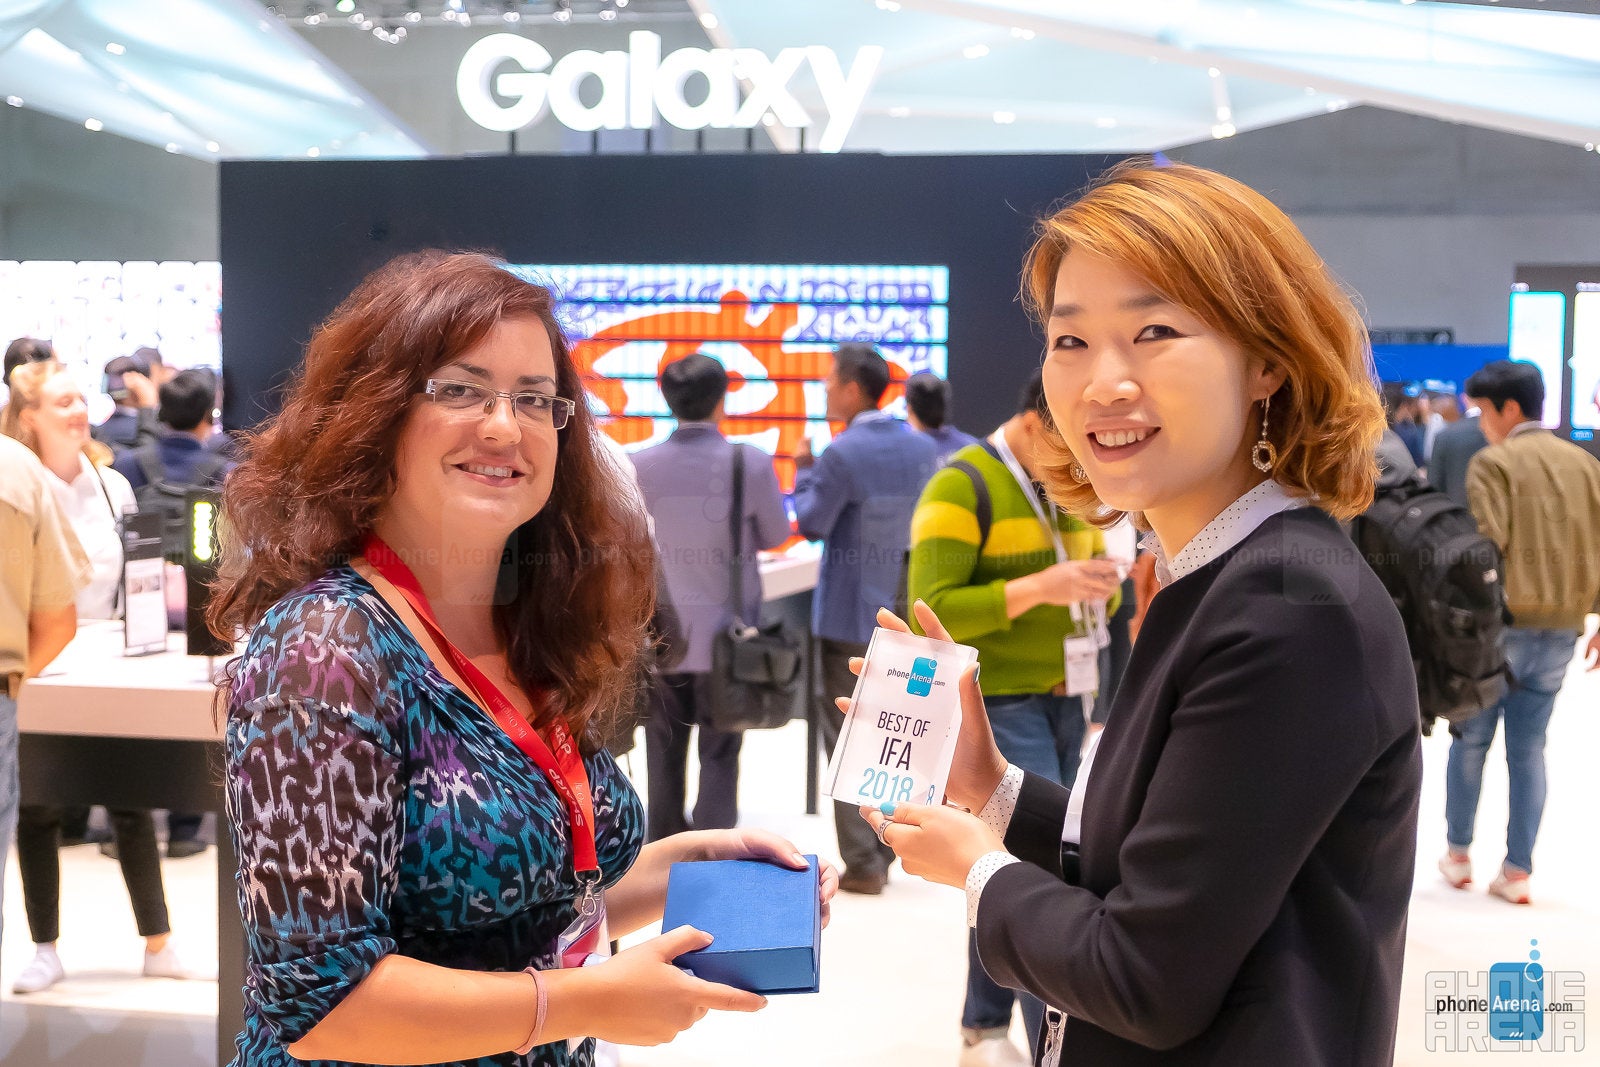 Sophia Kim, Global Communications, Public Relations, Mobile at Samsung Electronics, receives the &#039;Best of IFA 2018&#039; award for the Galaxy Note 9 at Samsung&#039;s IFA 2018 booth - Best of IFA 2018: It&#039;s awards time at Messe Berlin!